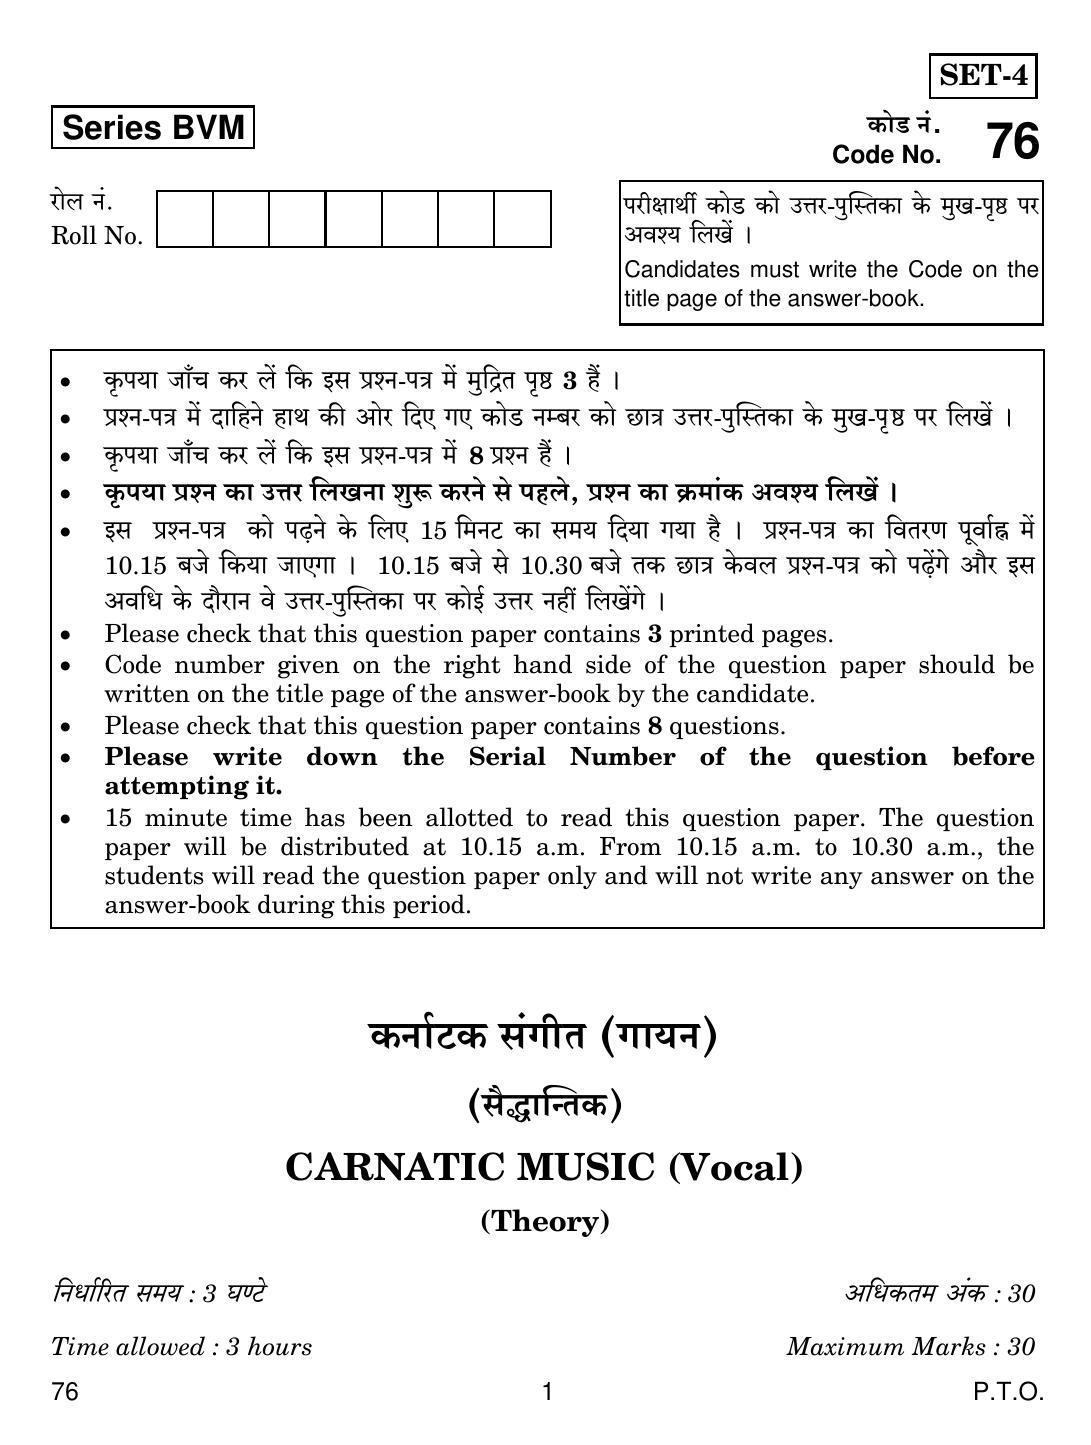 CBSE Class 12 76 Carnatic Music 2019 Question Paper - Page 1